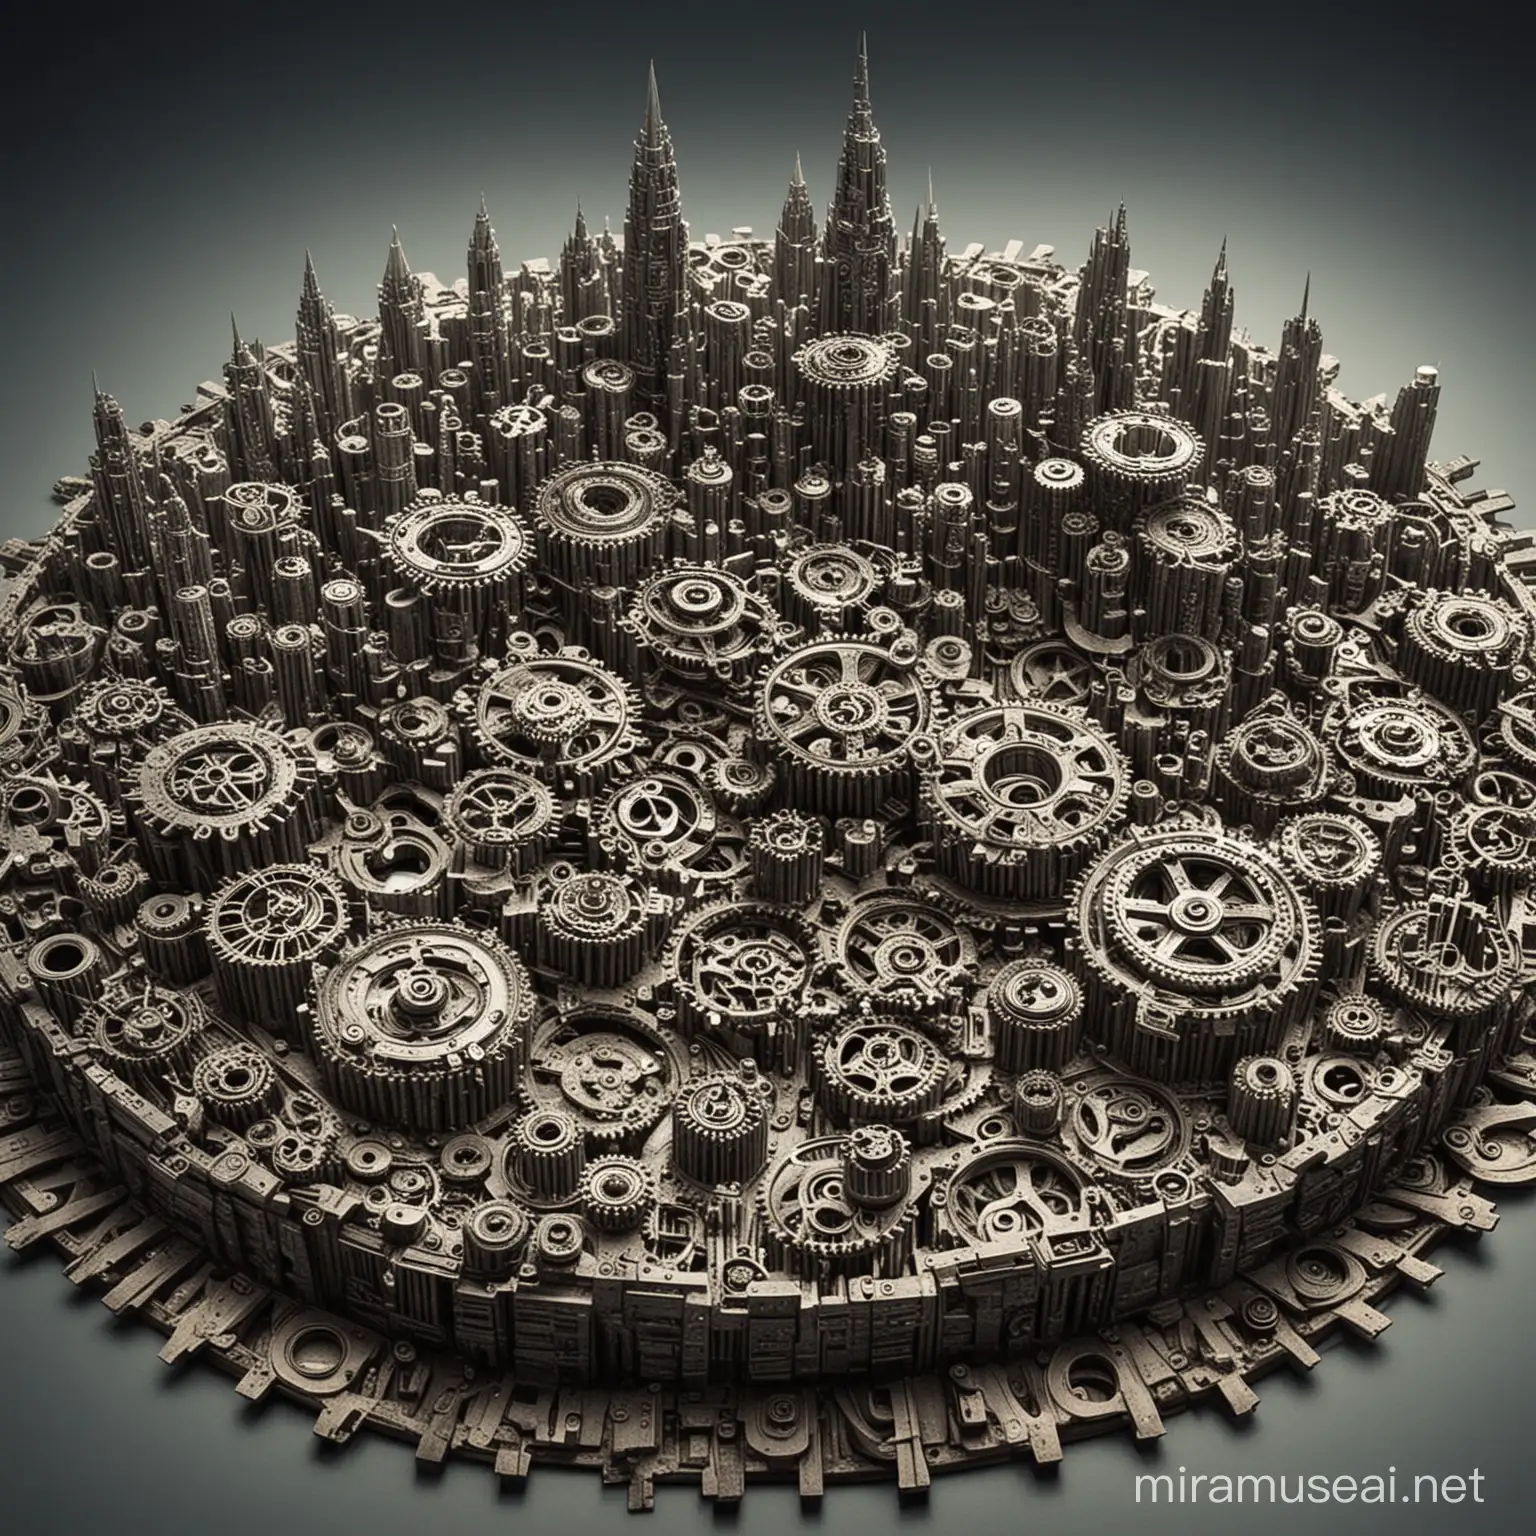 Steampunk Cityscape Made from Intricate Gears